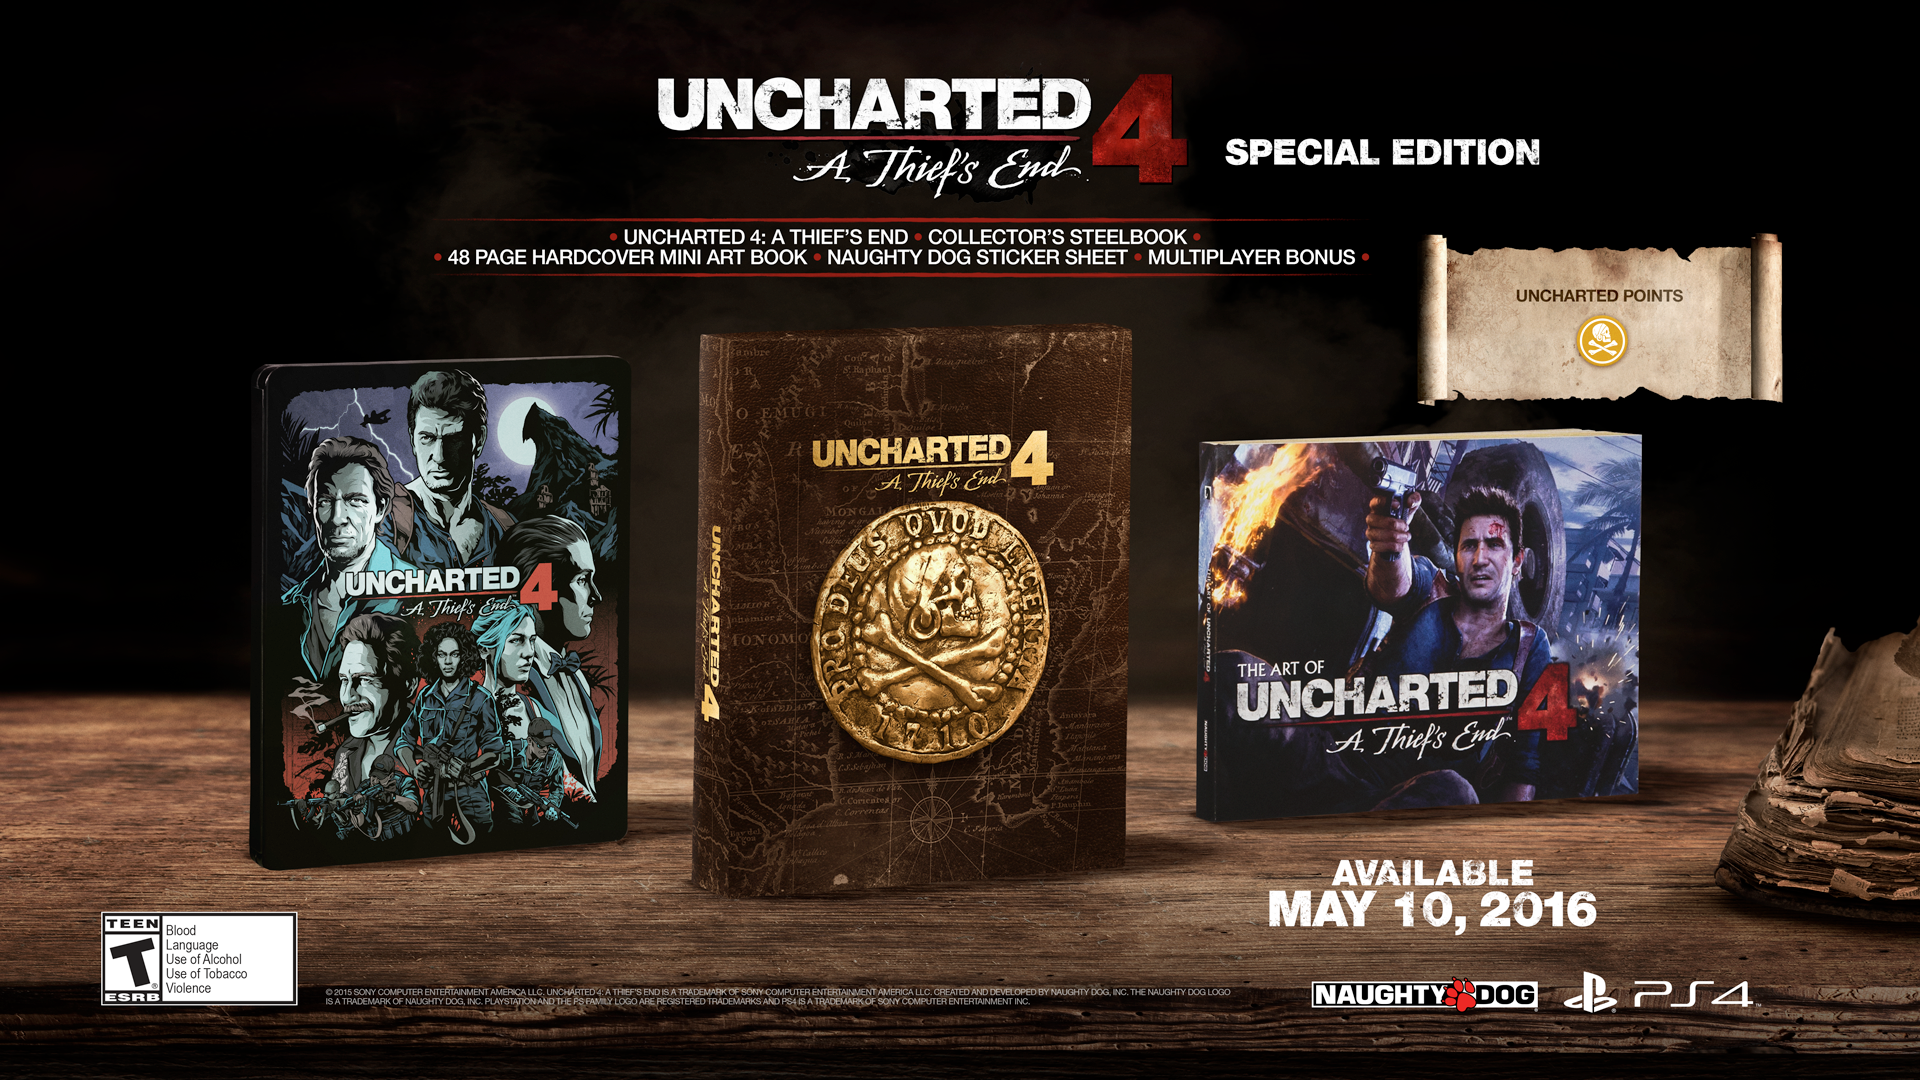 Uncharted 4: A Thief's End Special Edition (2016)